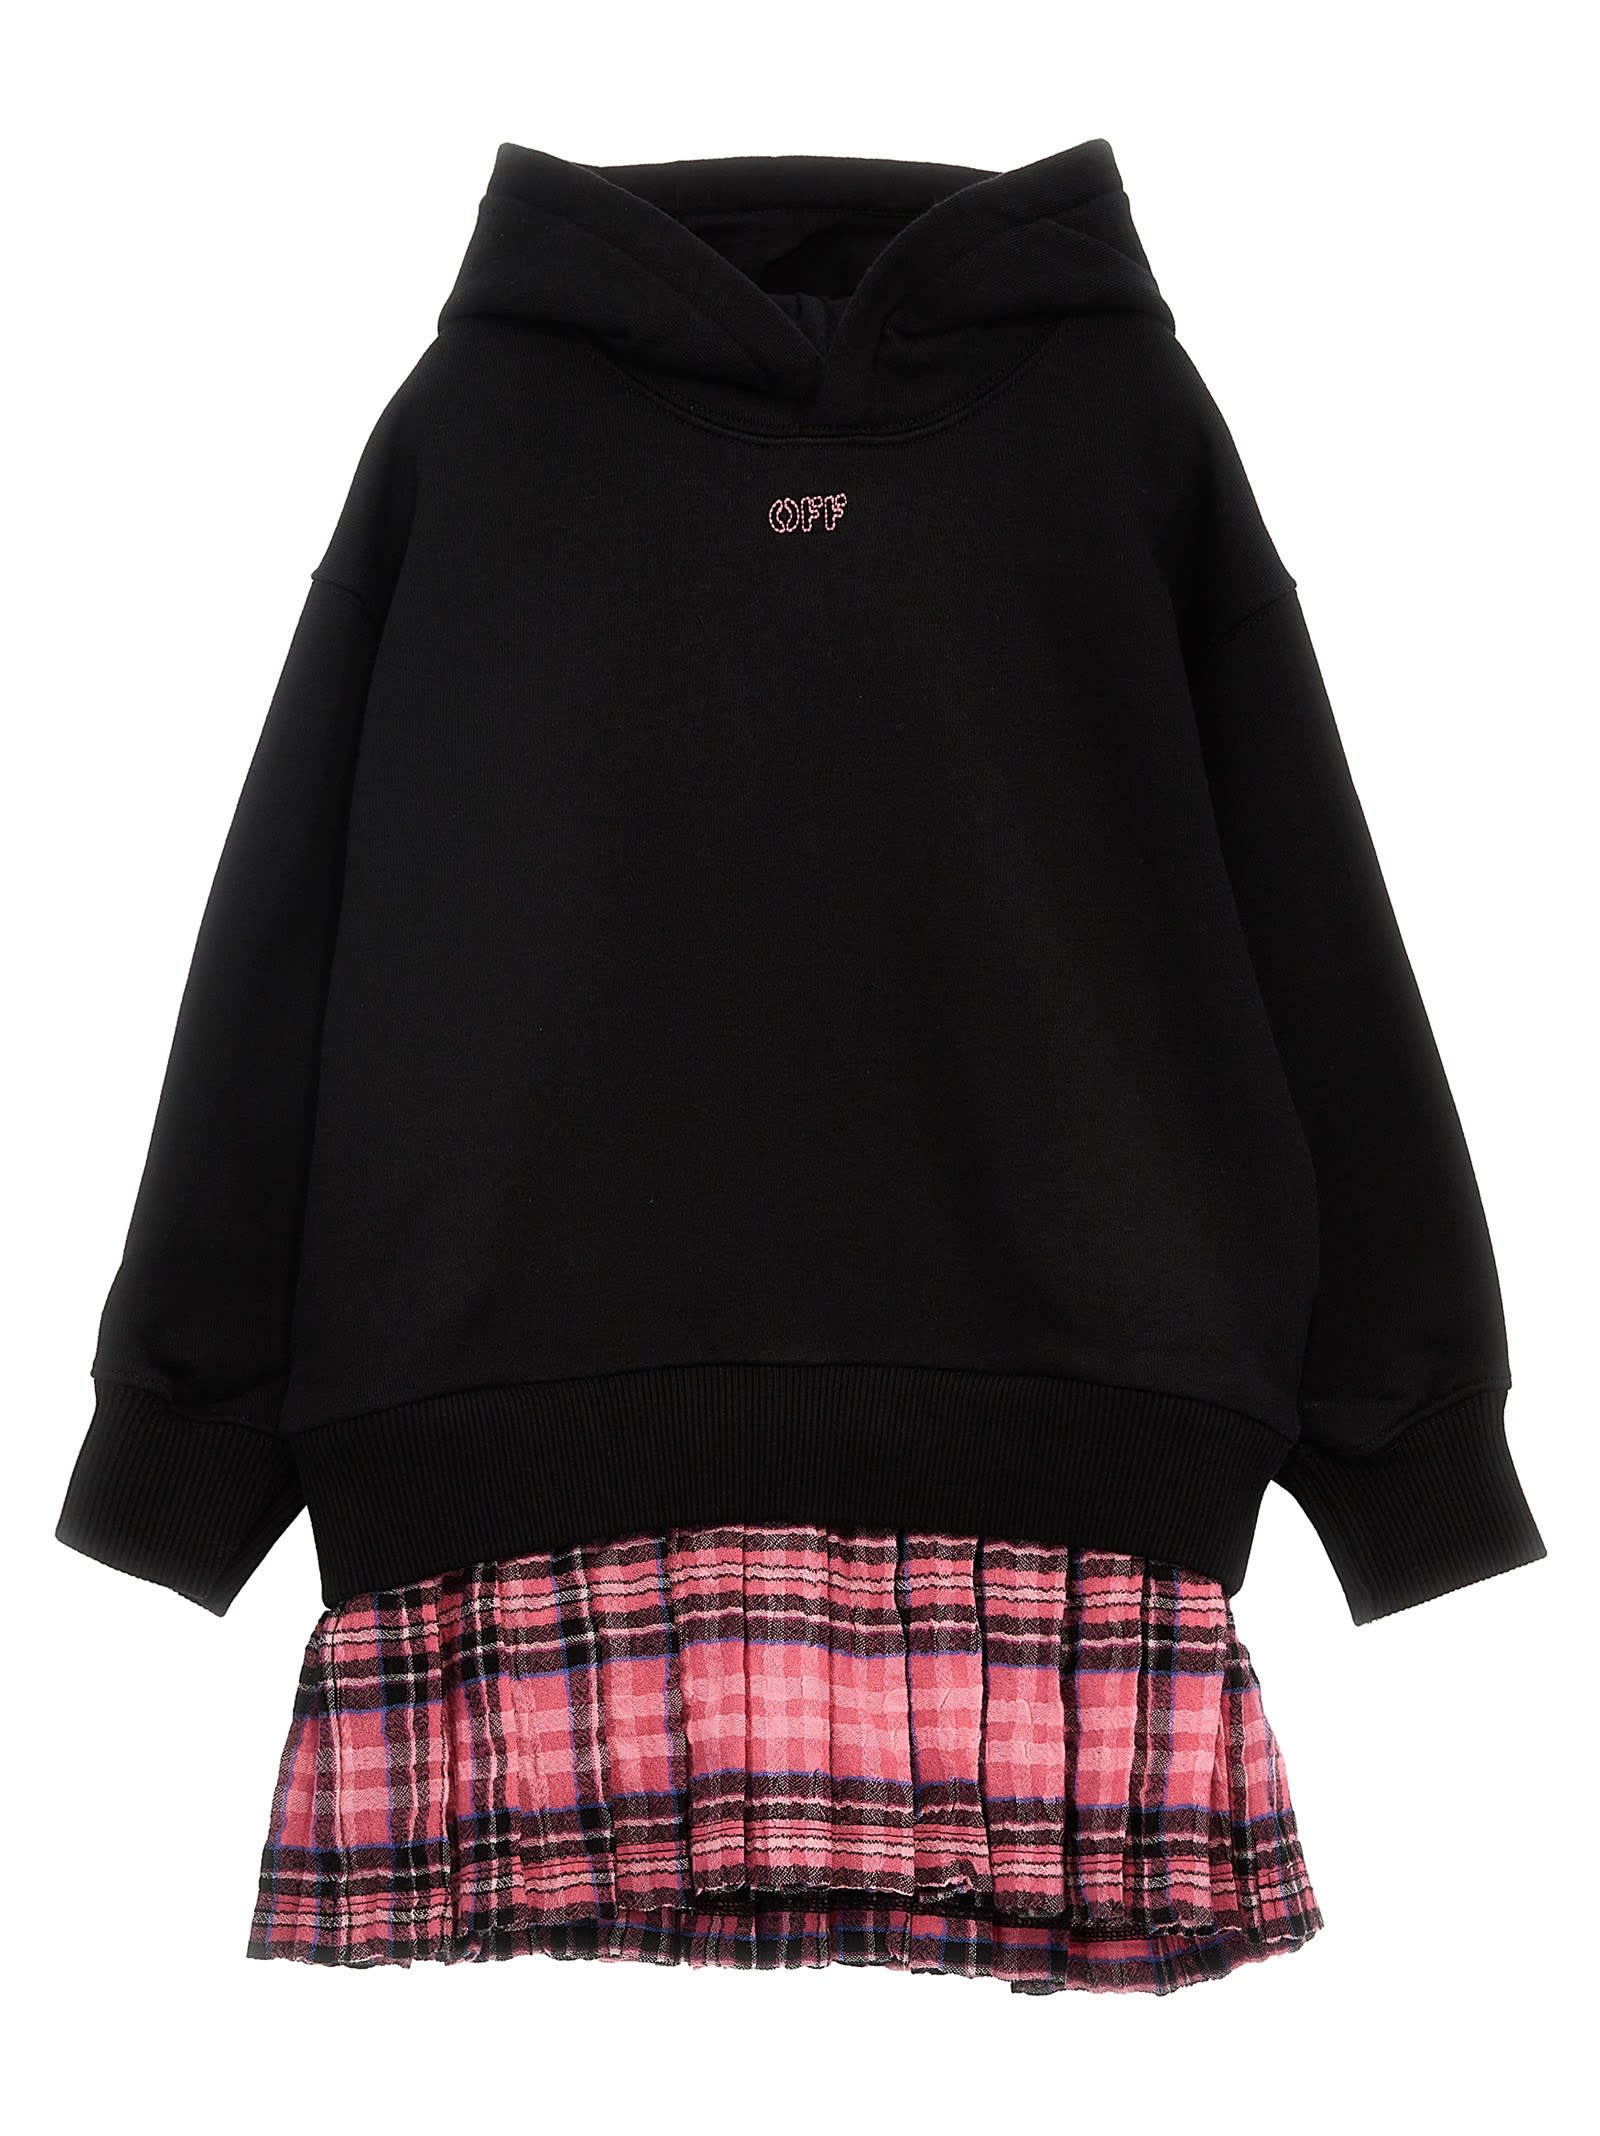 OFF-WHITE OFF STAMP HOODED DRESS